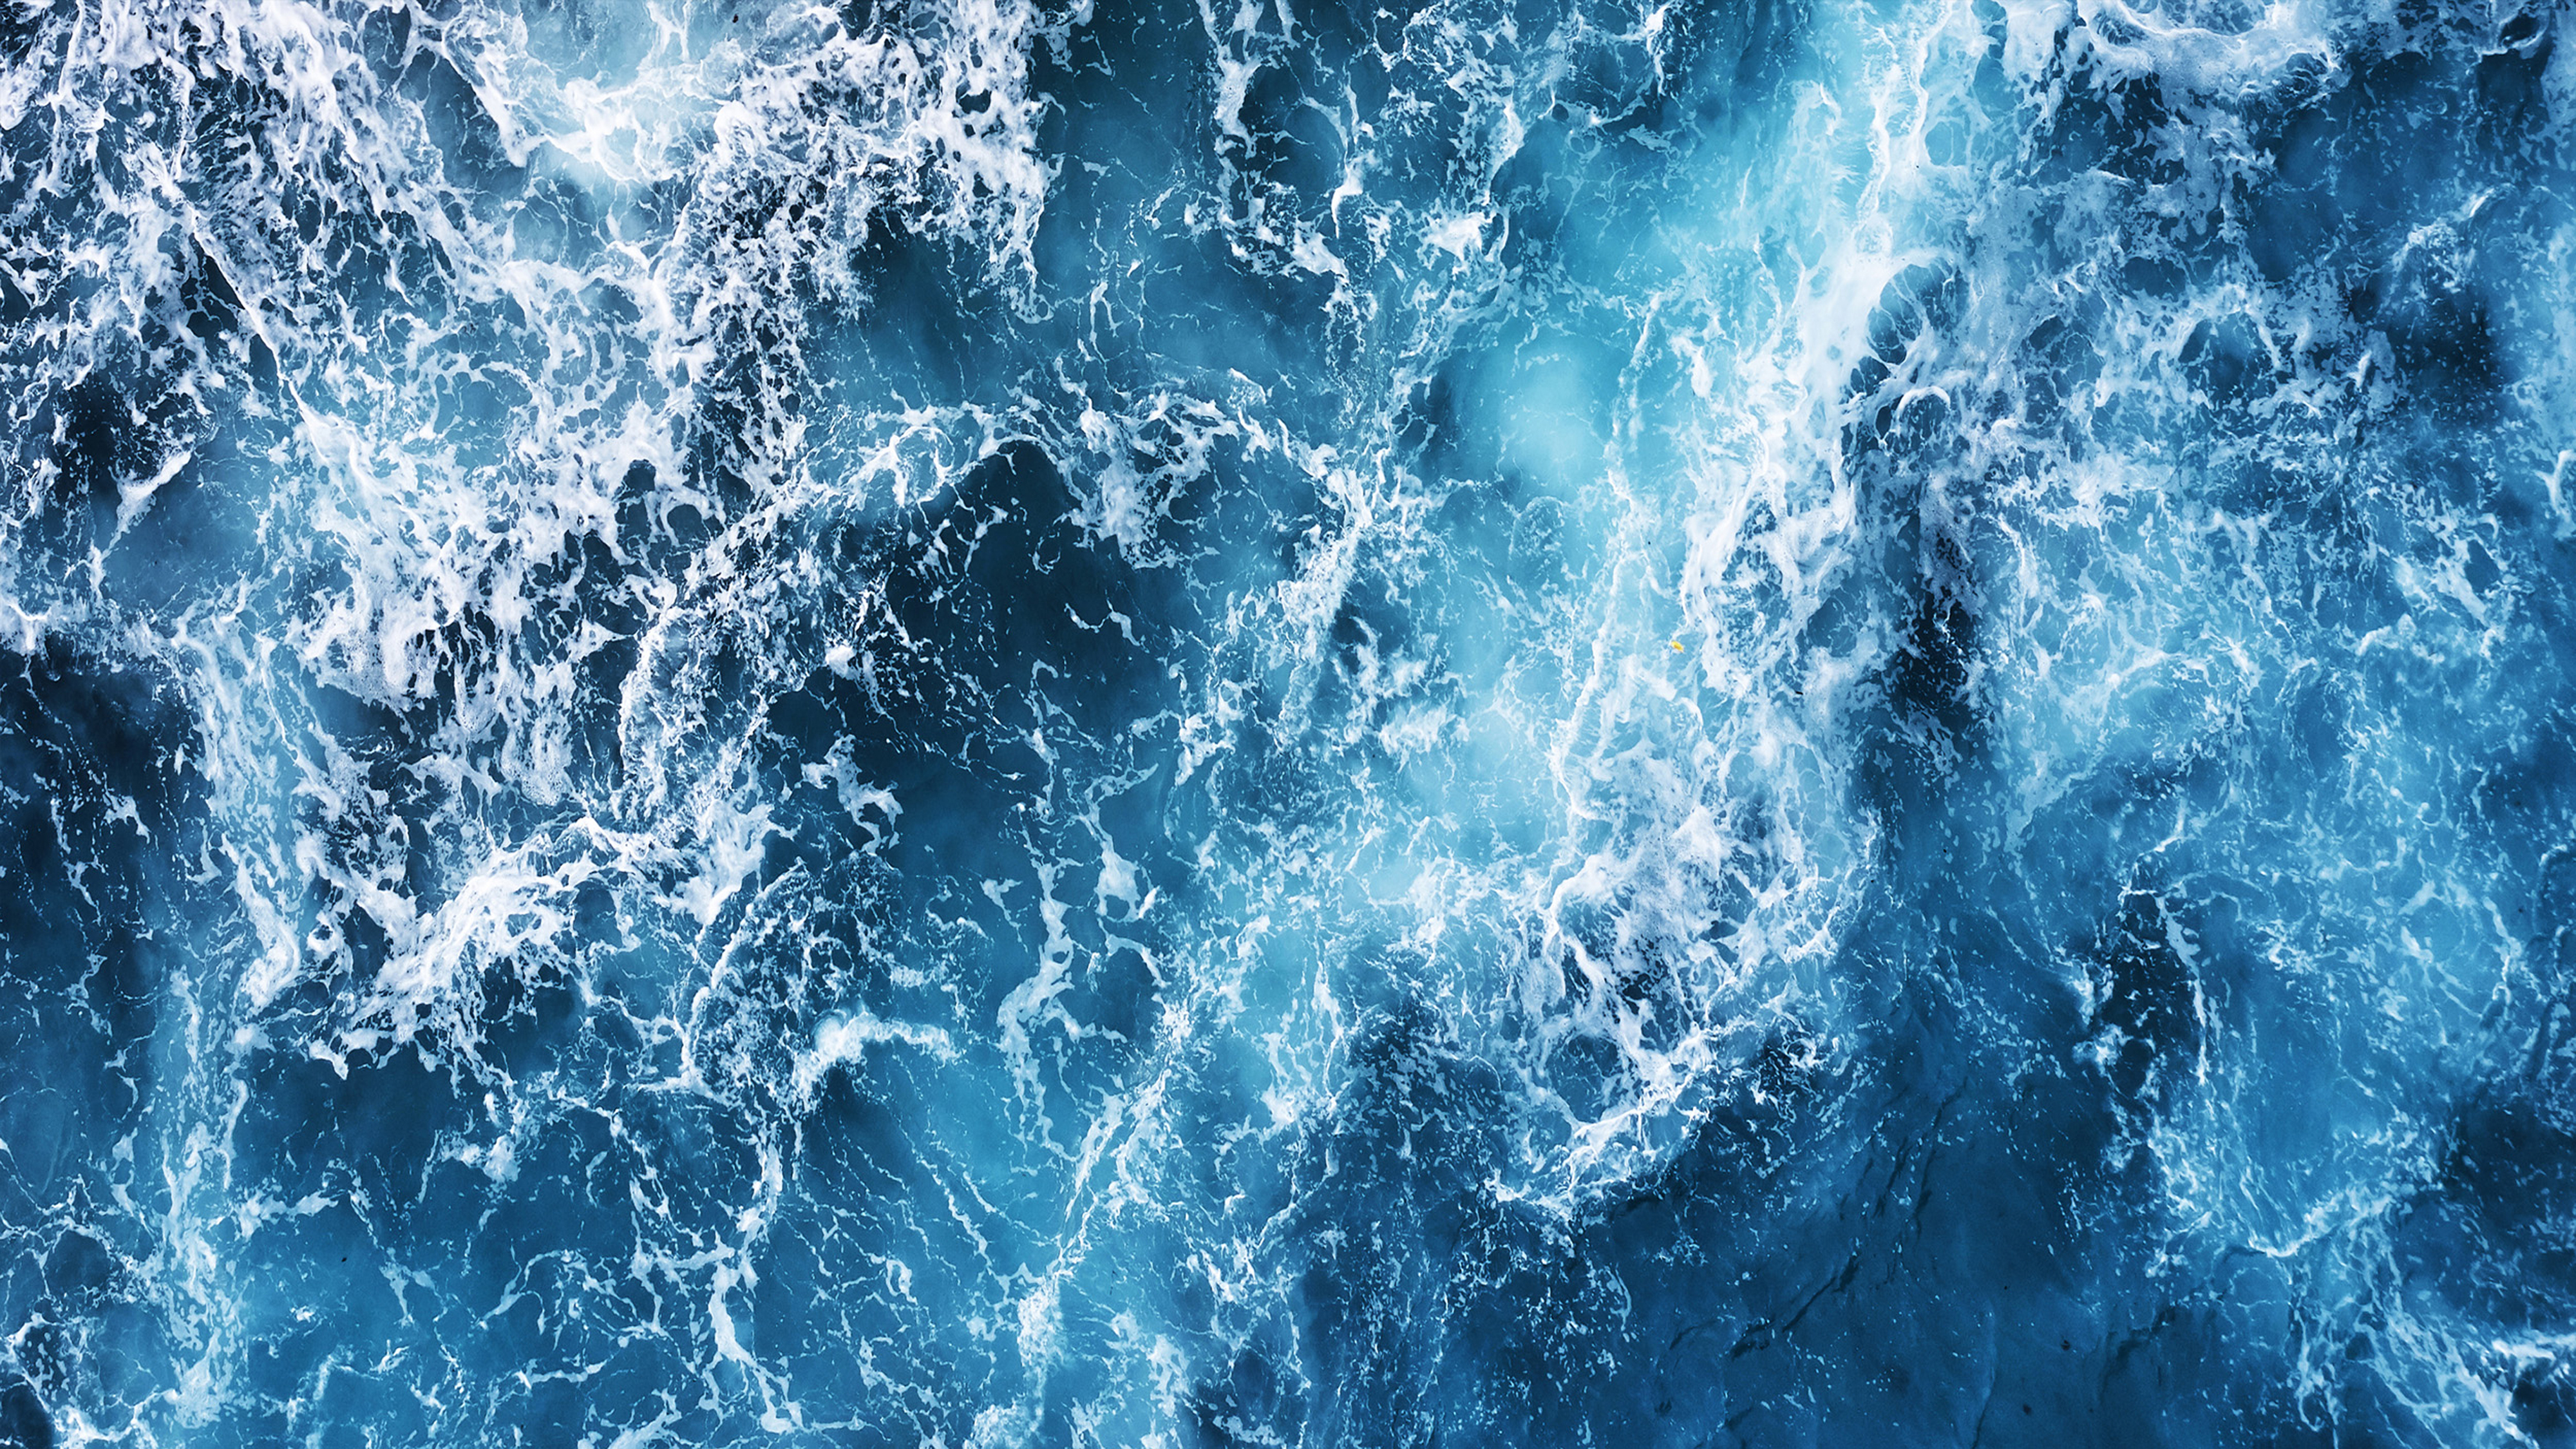 Ocean waves seen from above.